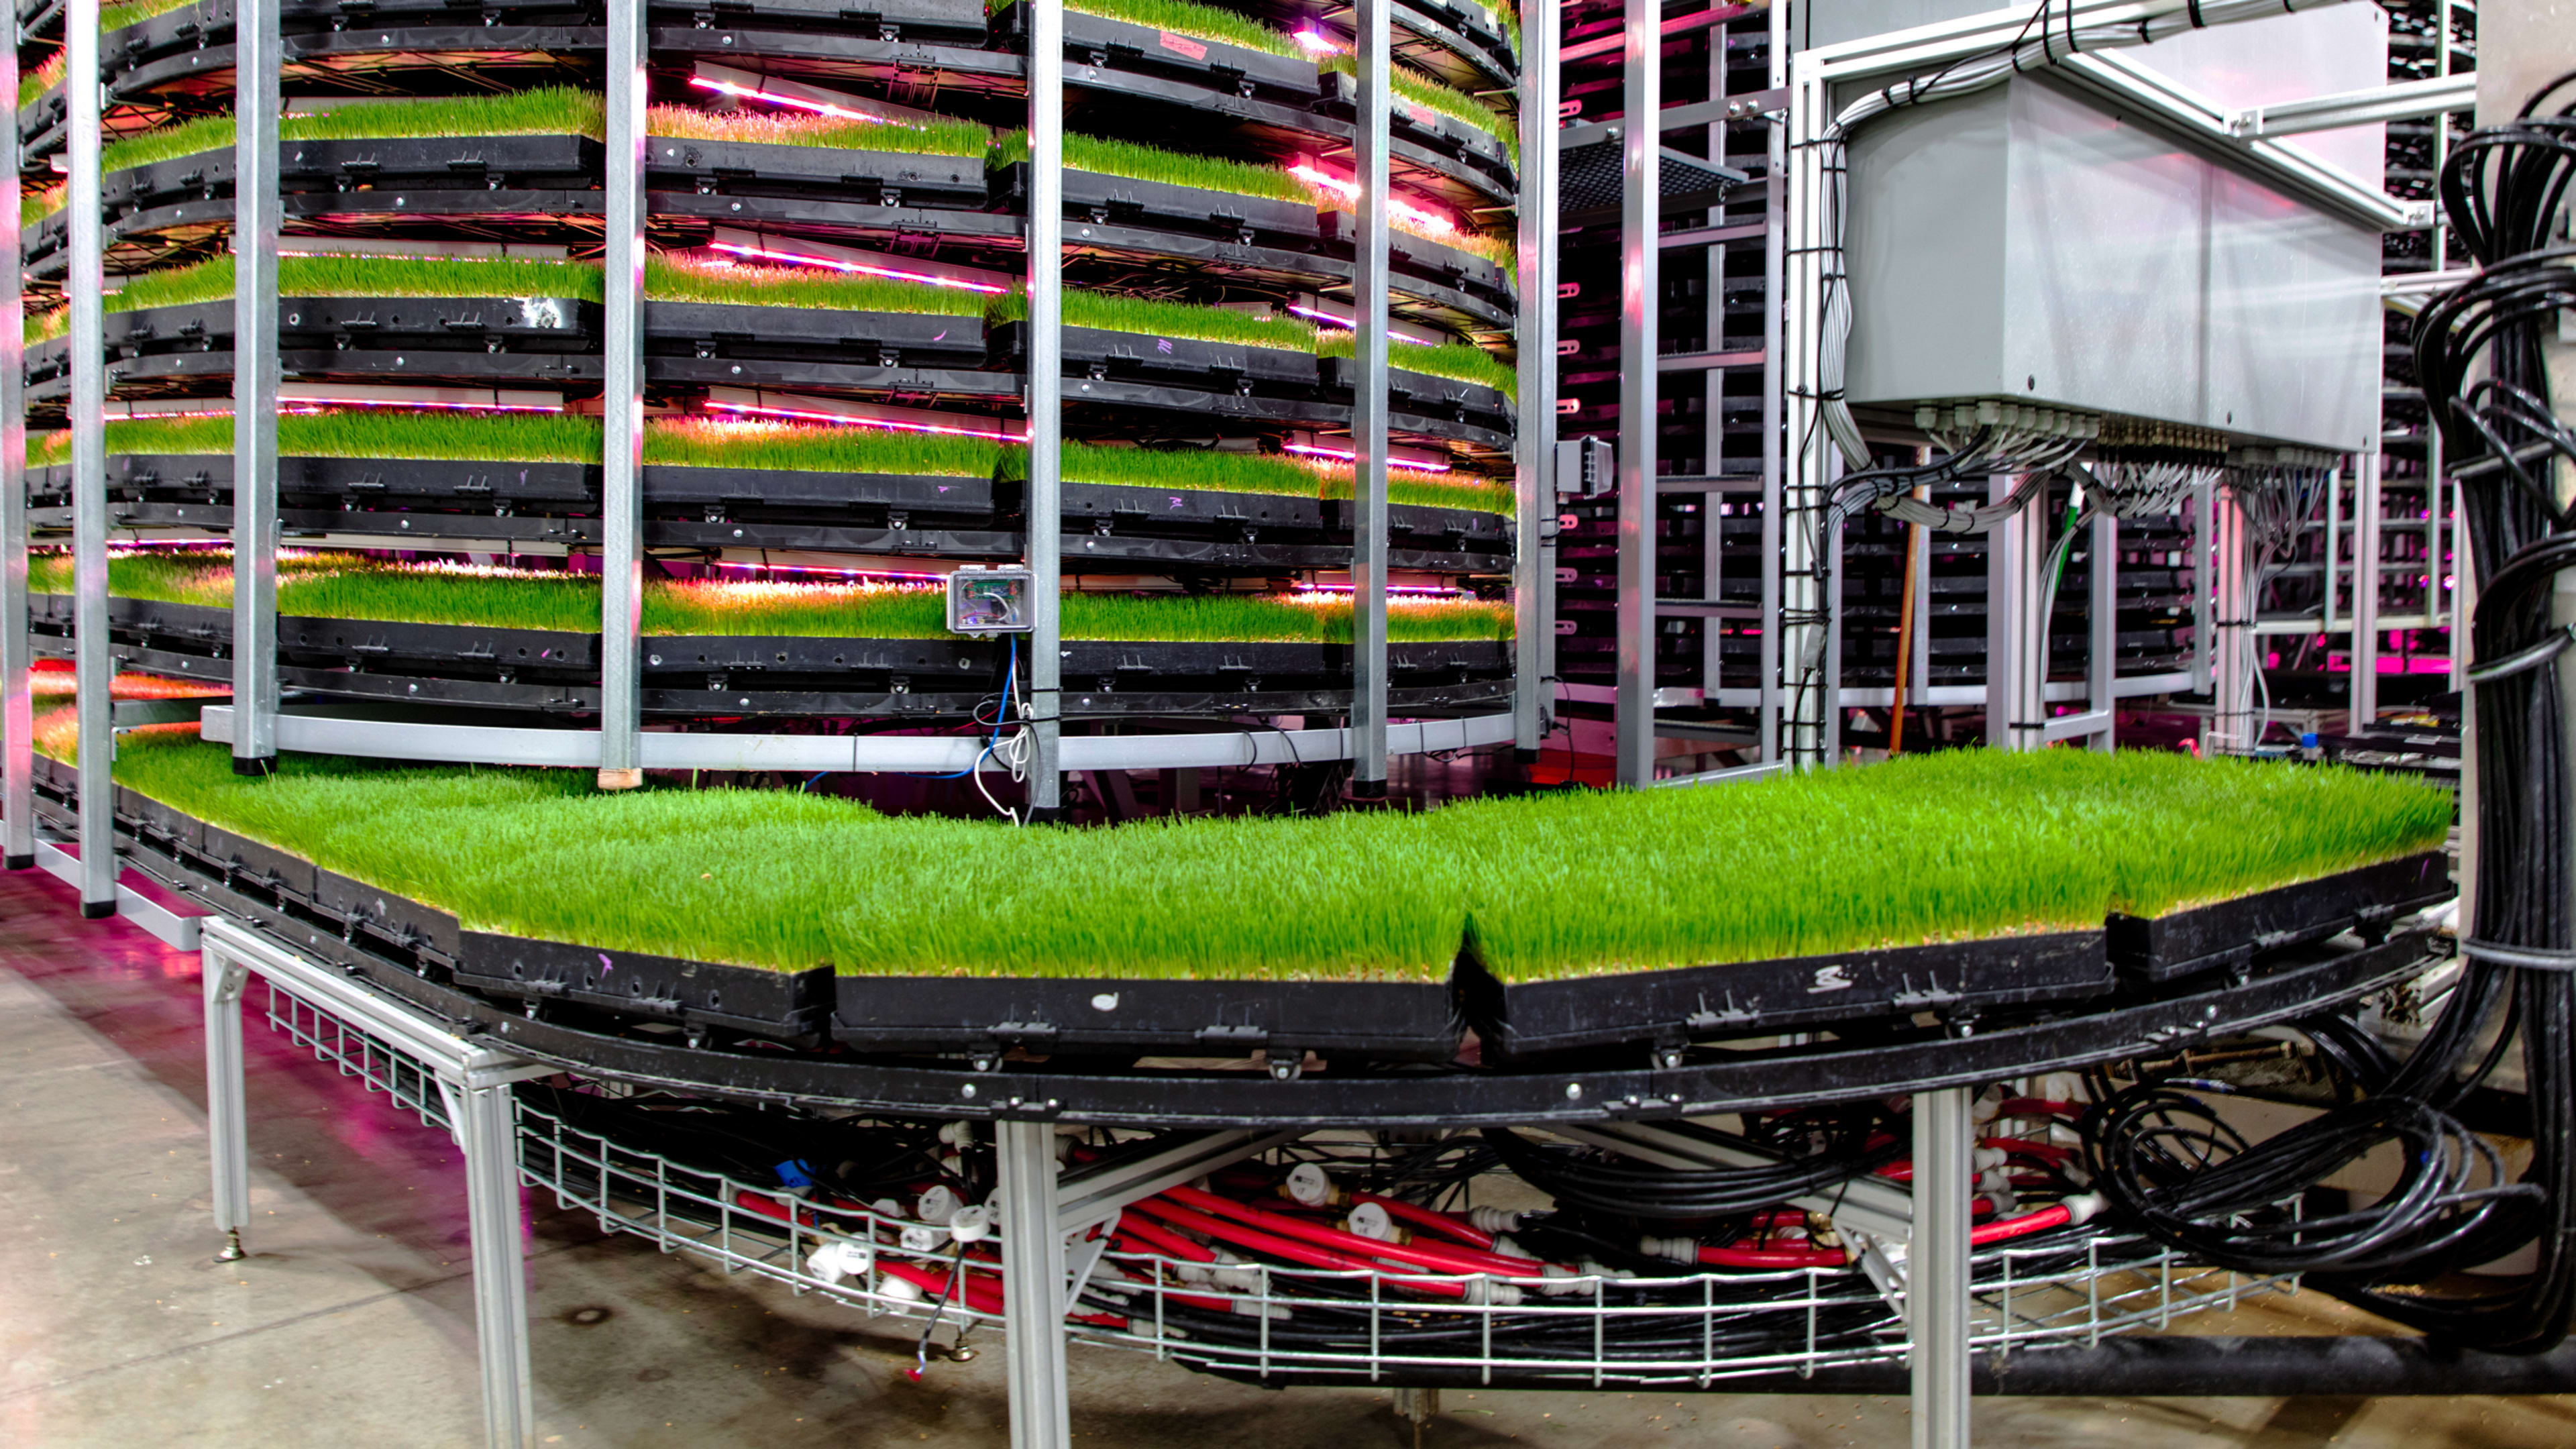 This vertical farm is growing food—but it’s for cows